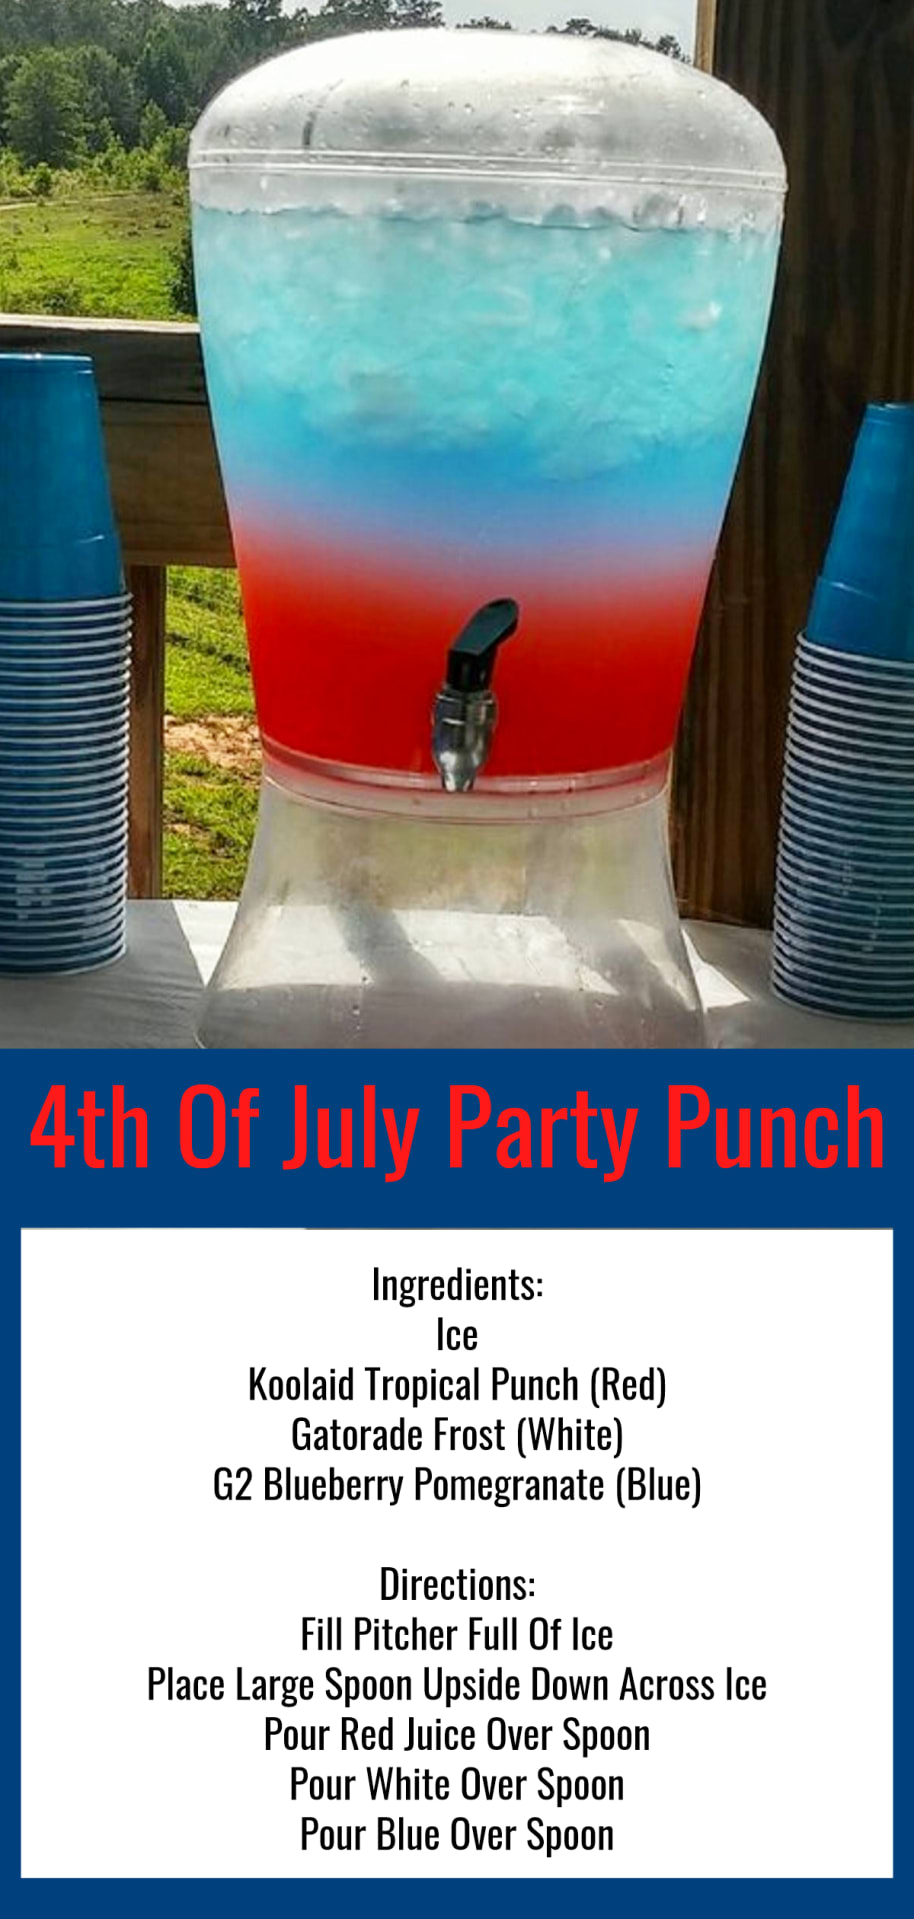 4th of July Punch Recipe - Nonalcoholic Red White and Blue Layered Party Punch for kids and those who are NOT drinking alcohol at your 4th of July party.  Lots more 4th of July party ideas and party food ideas for your July 4th party, cookout, block party, picnic, BBQ or pool party. How to make red white and blue layered punch drinks for a crowd.